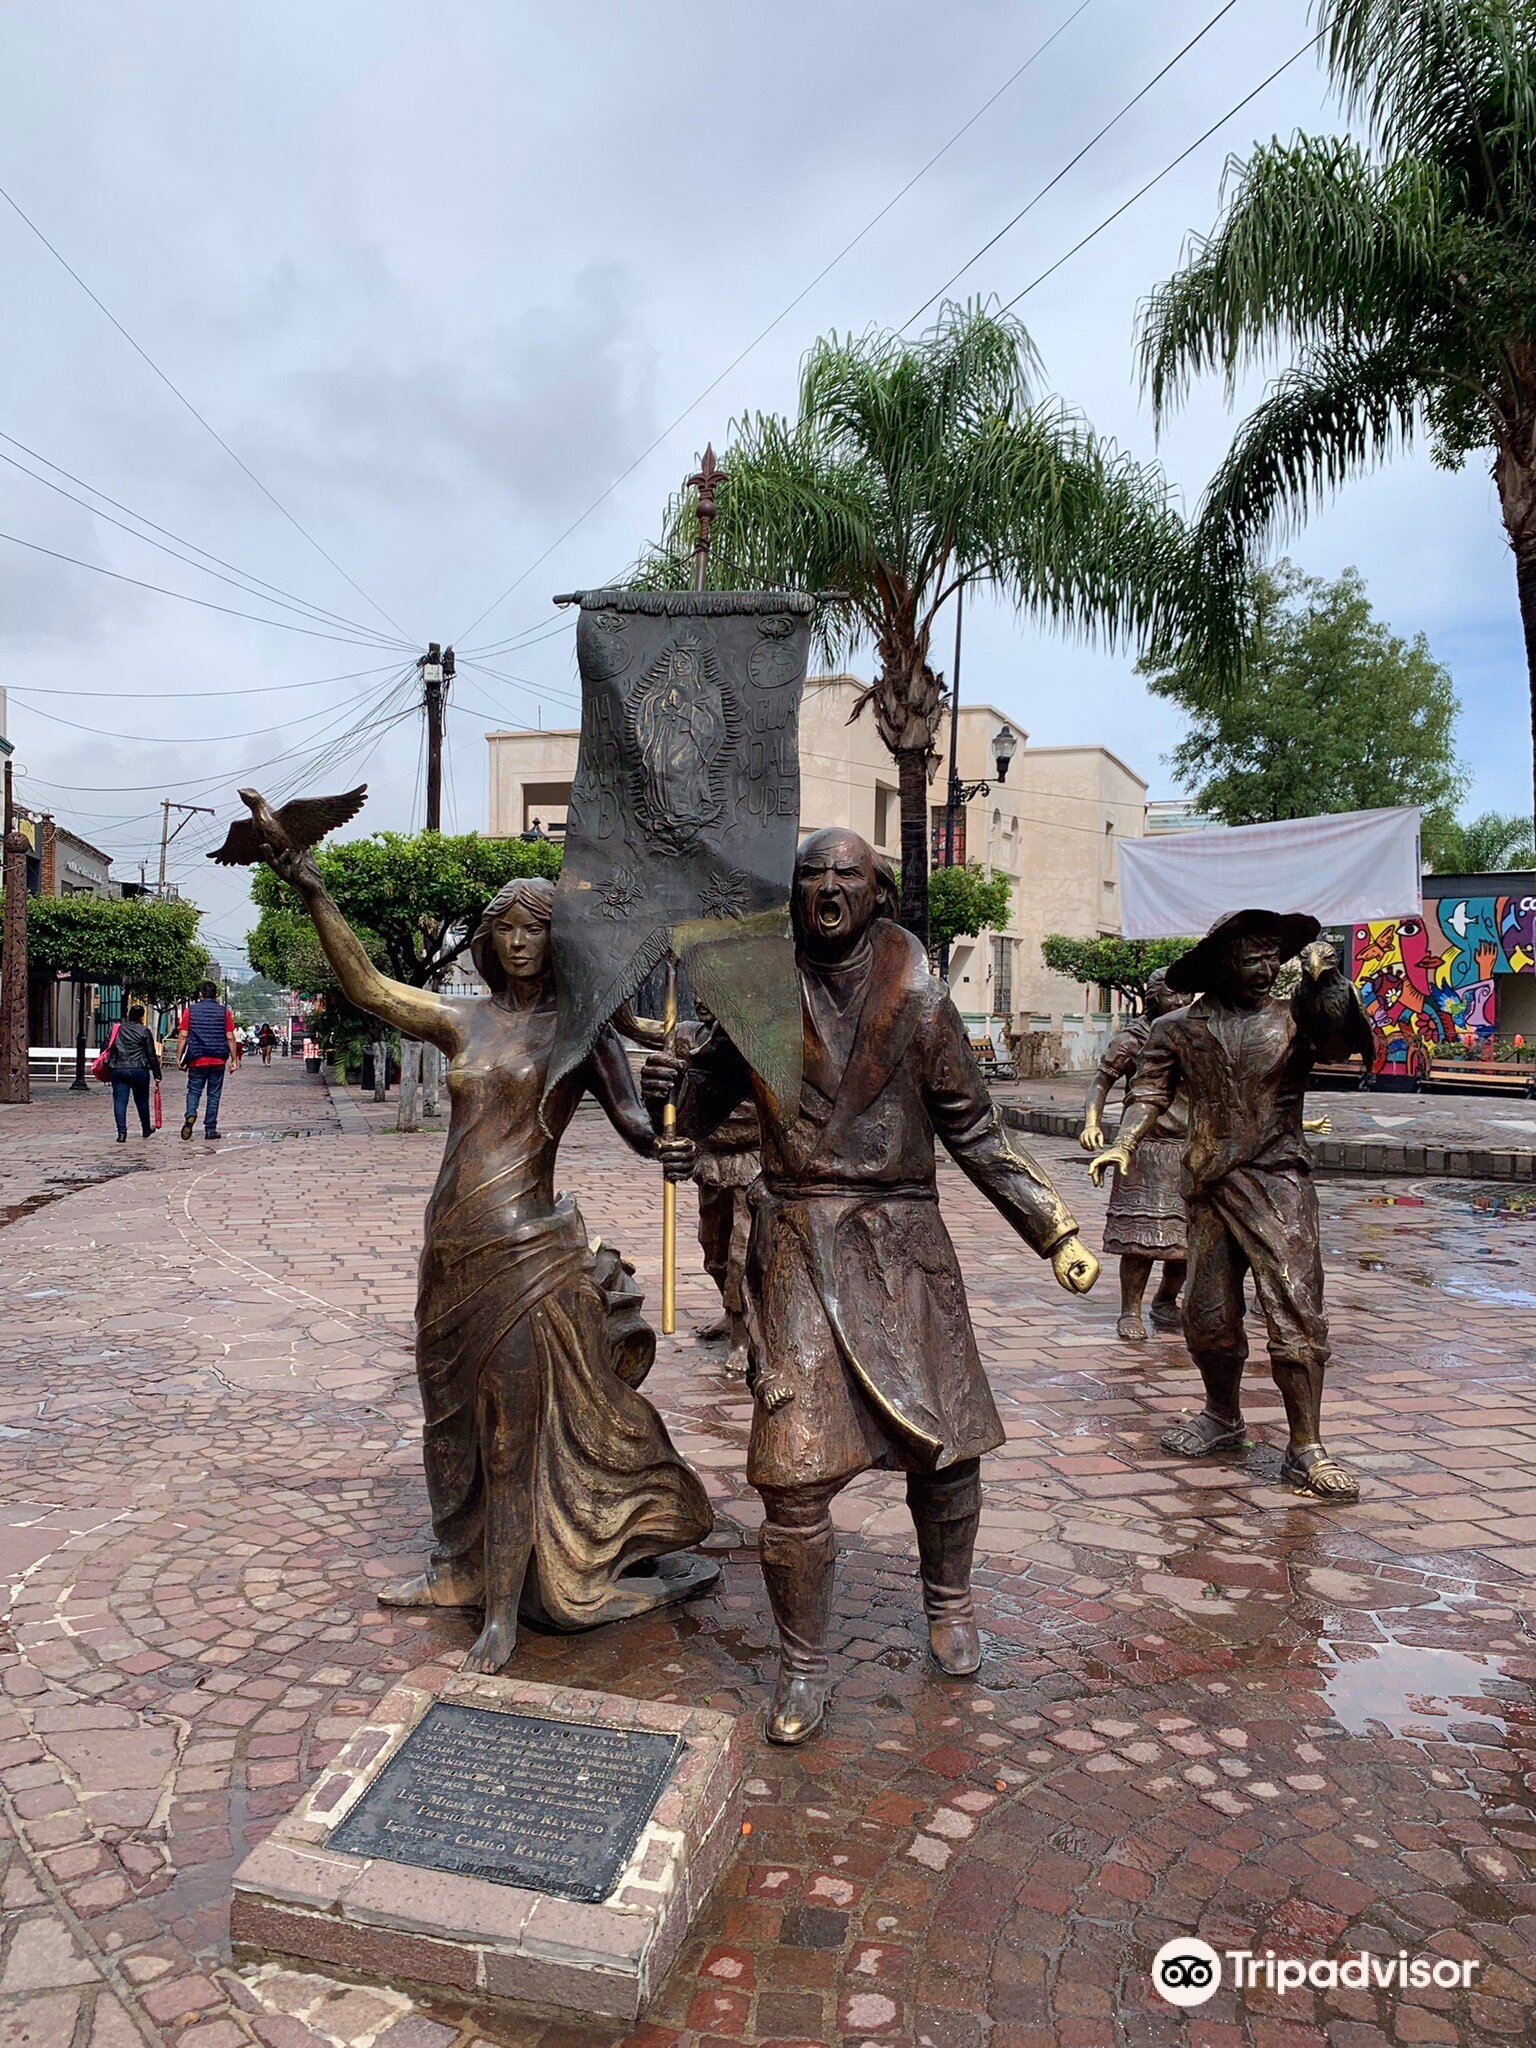 Tequilas Del Senor attraction reviews - Tequilas Del Senor tickets -  Tequilas Del Senor discounts - Tequilas Del Senor transportation, address,  opening hours - attractions, hotels, and food near Tequilas Del Senor -  